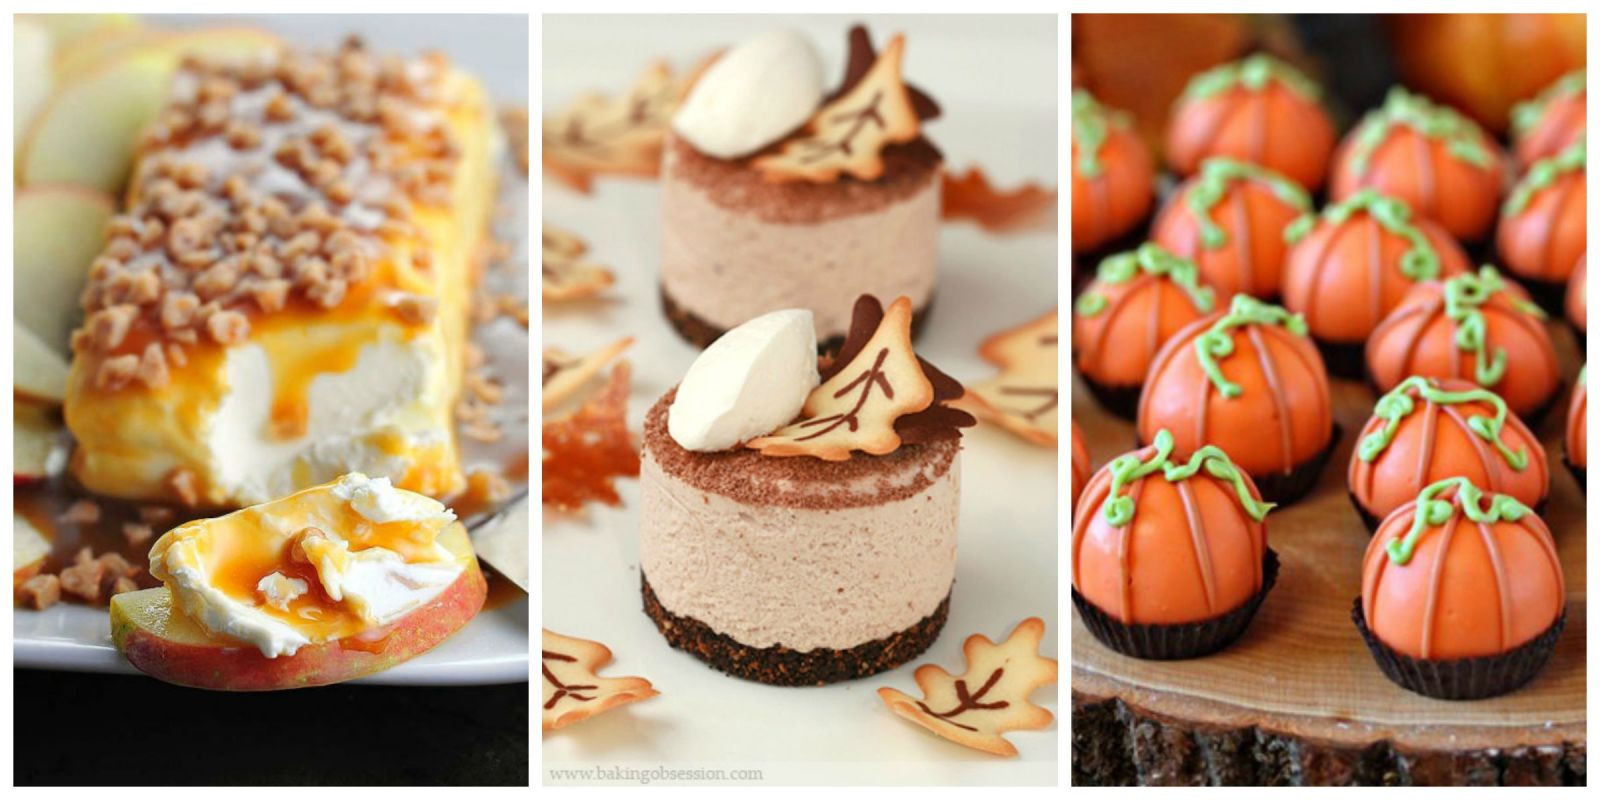 Desserts For Fall
 35 Easy Fall Dessert Recipes Best Treats for Autumn Parties